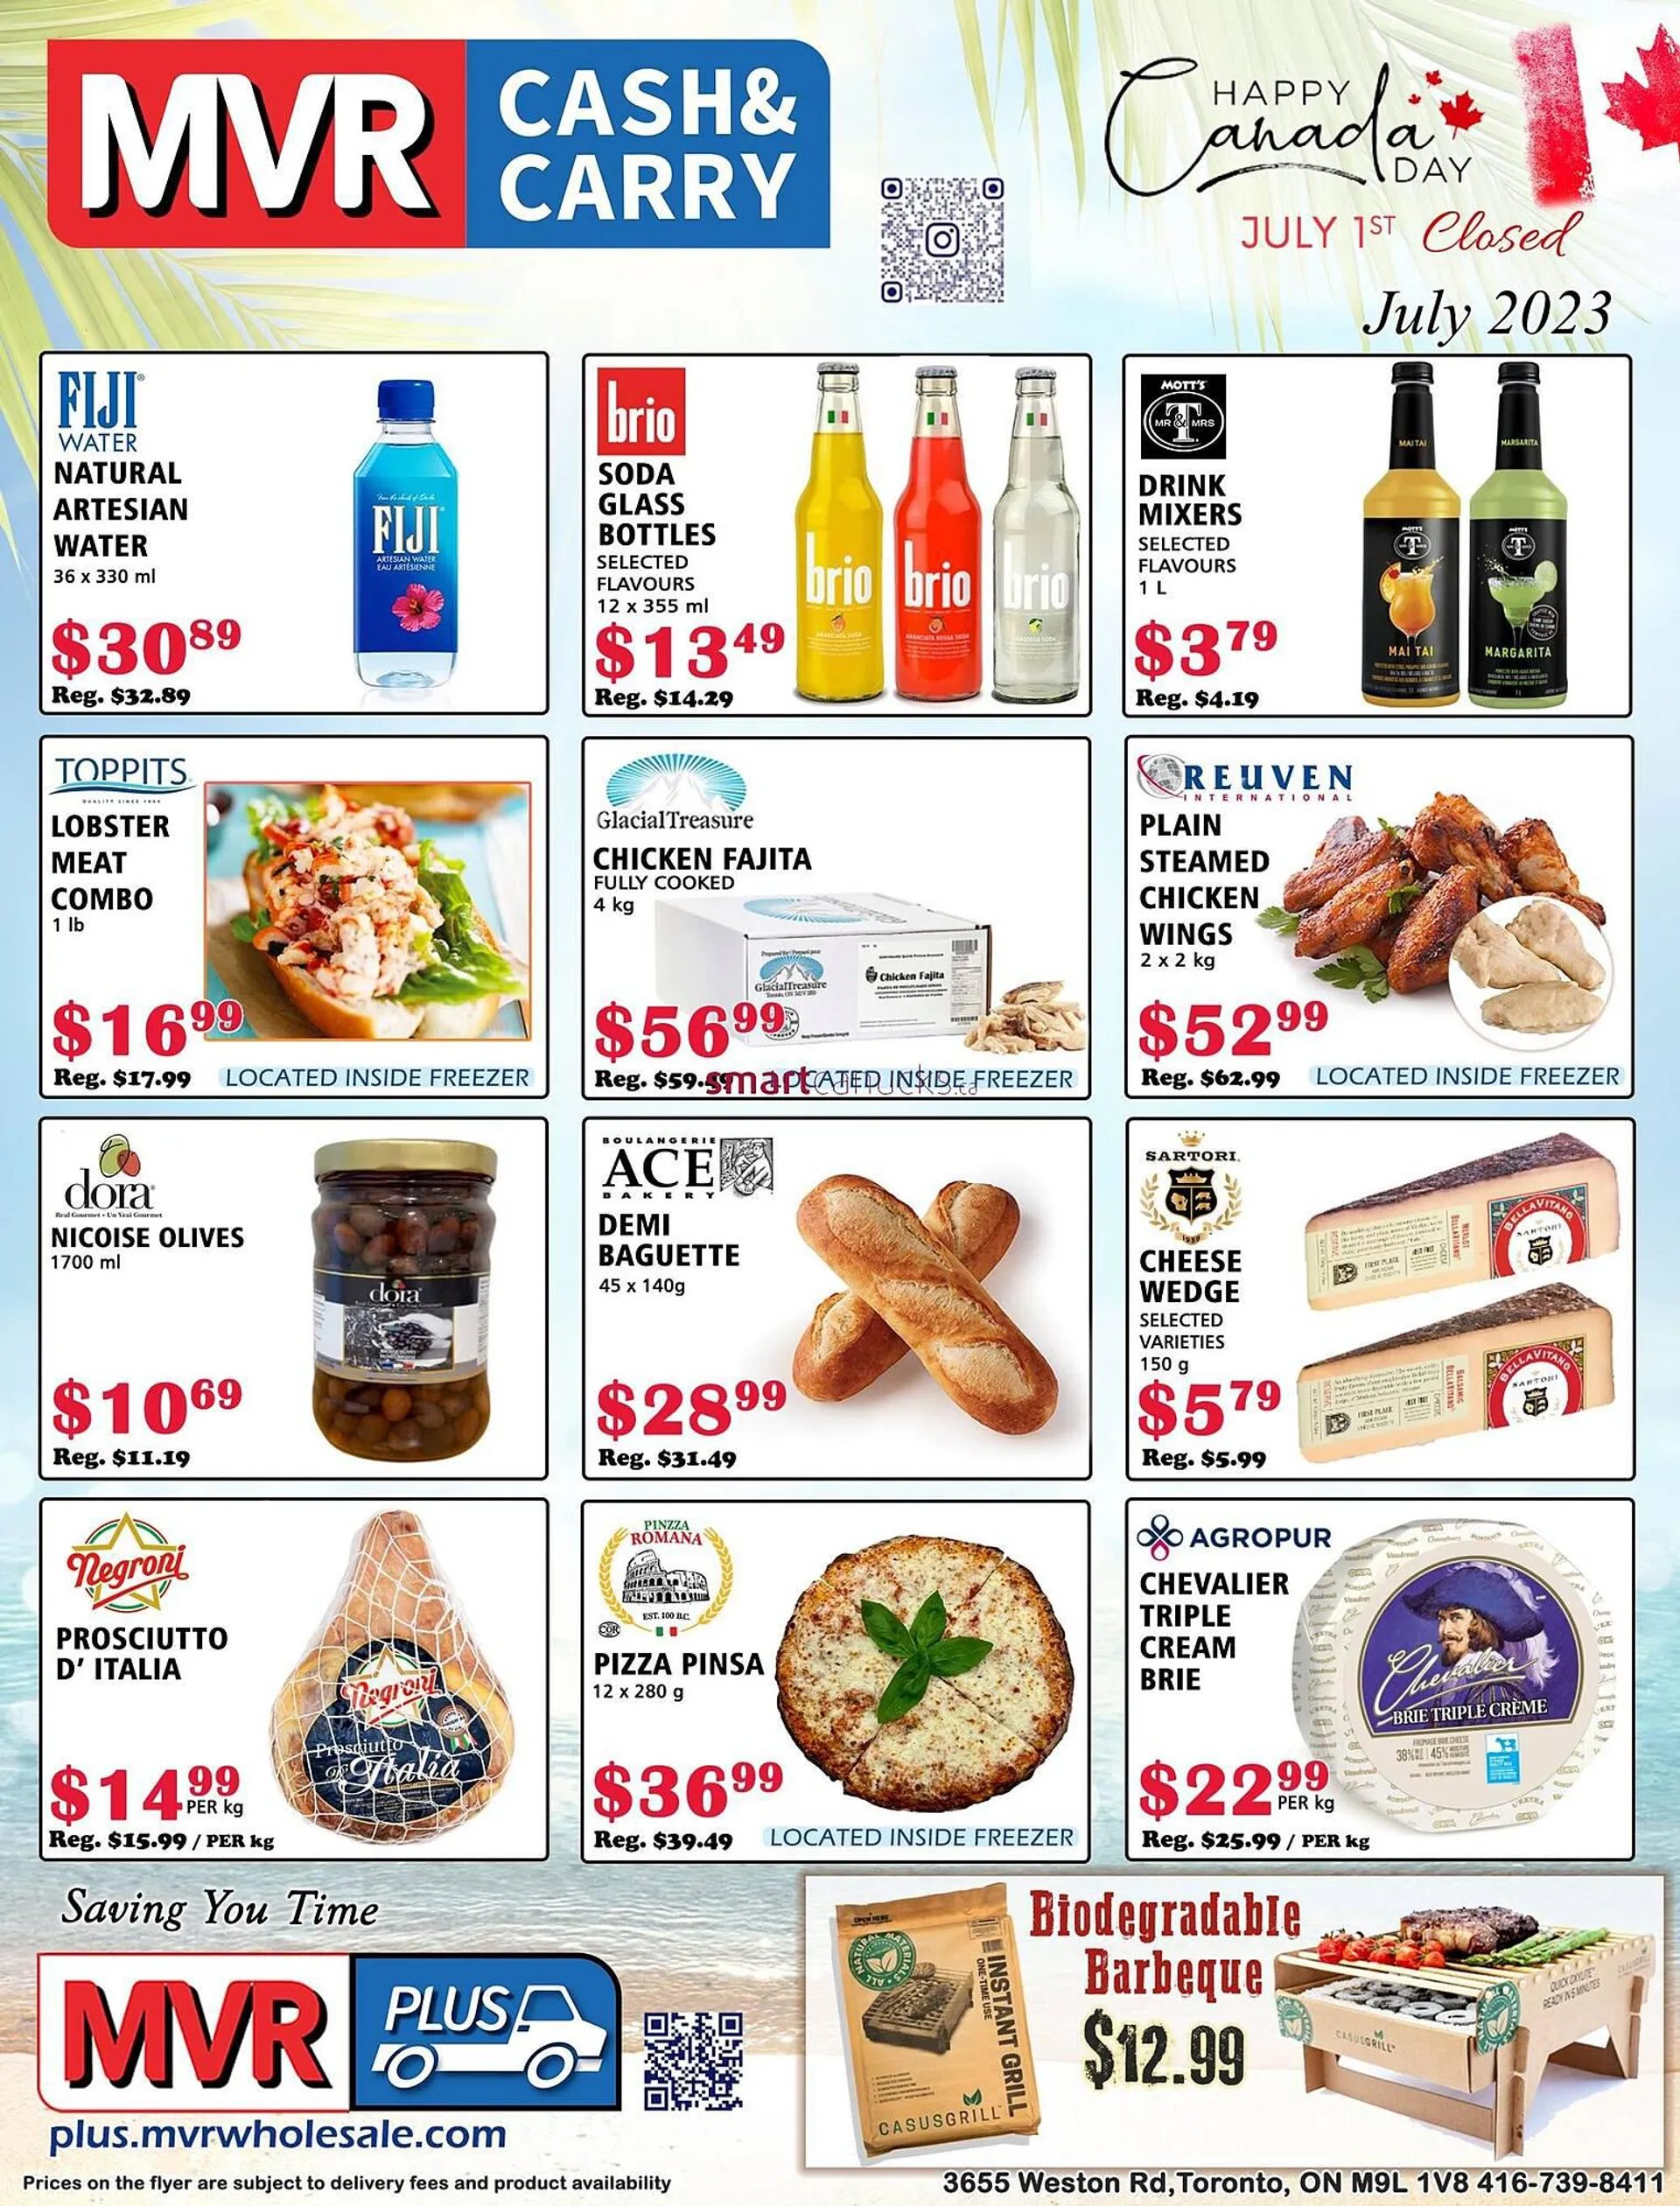 MVR Cash & Carry flyer - 1